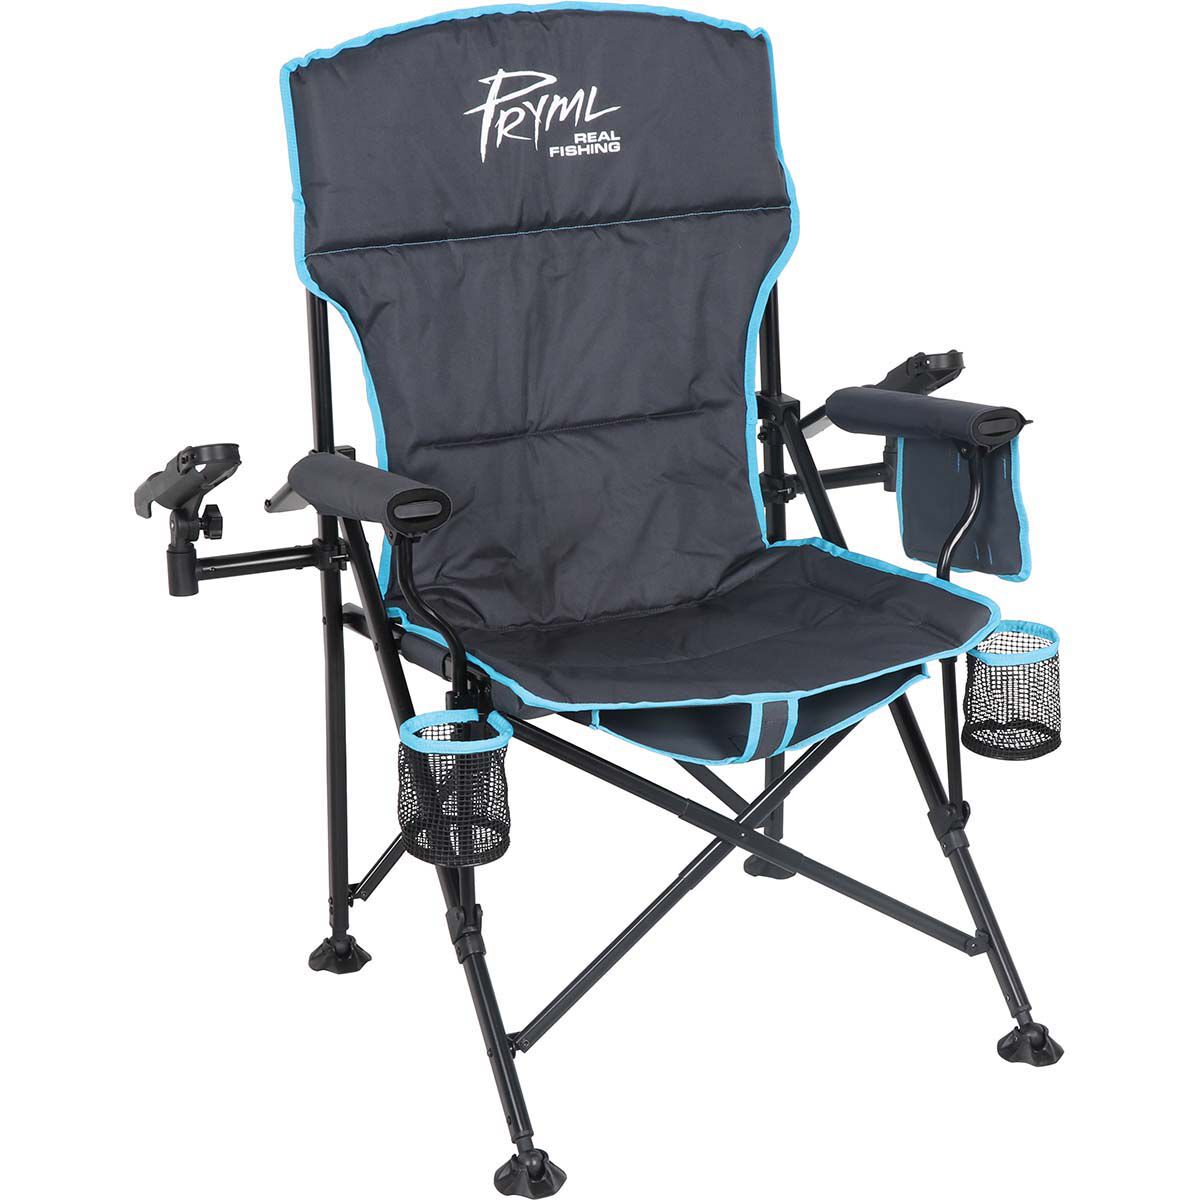 Pryml Premium Fishing Chair with Rod Holders 160kg | BCF